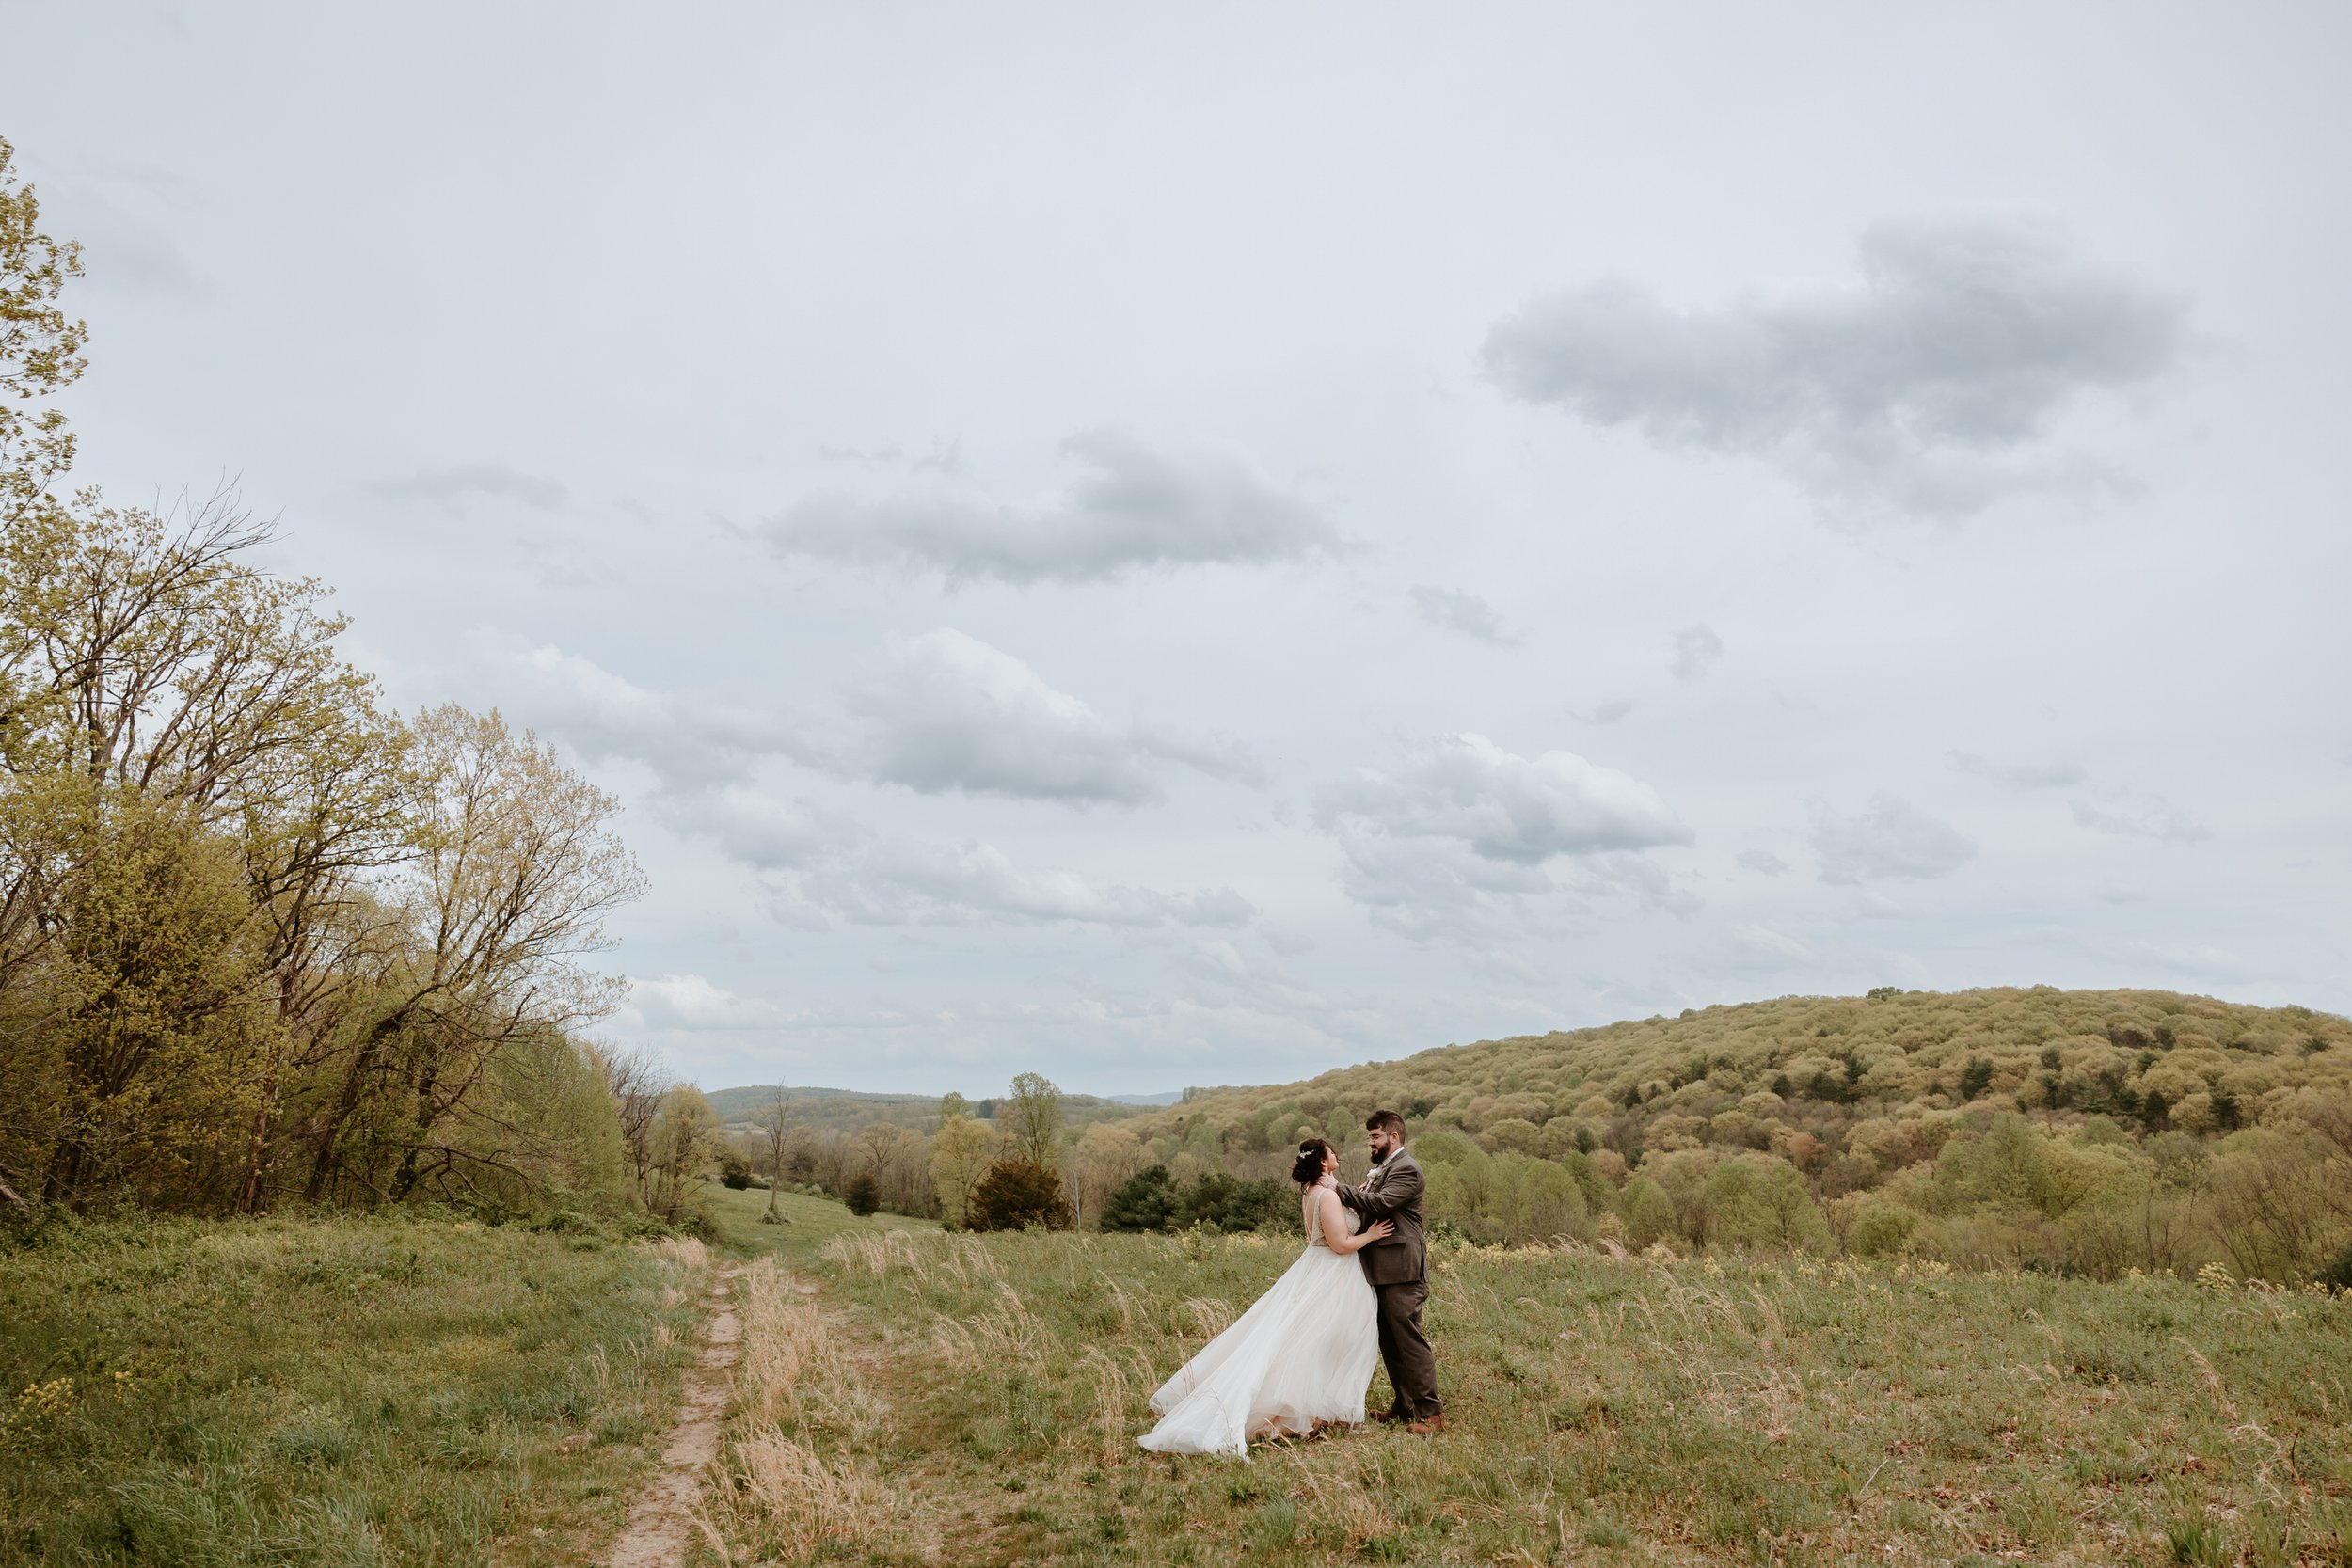 Bride and groom embrace on top of hill with mountain in the background.